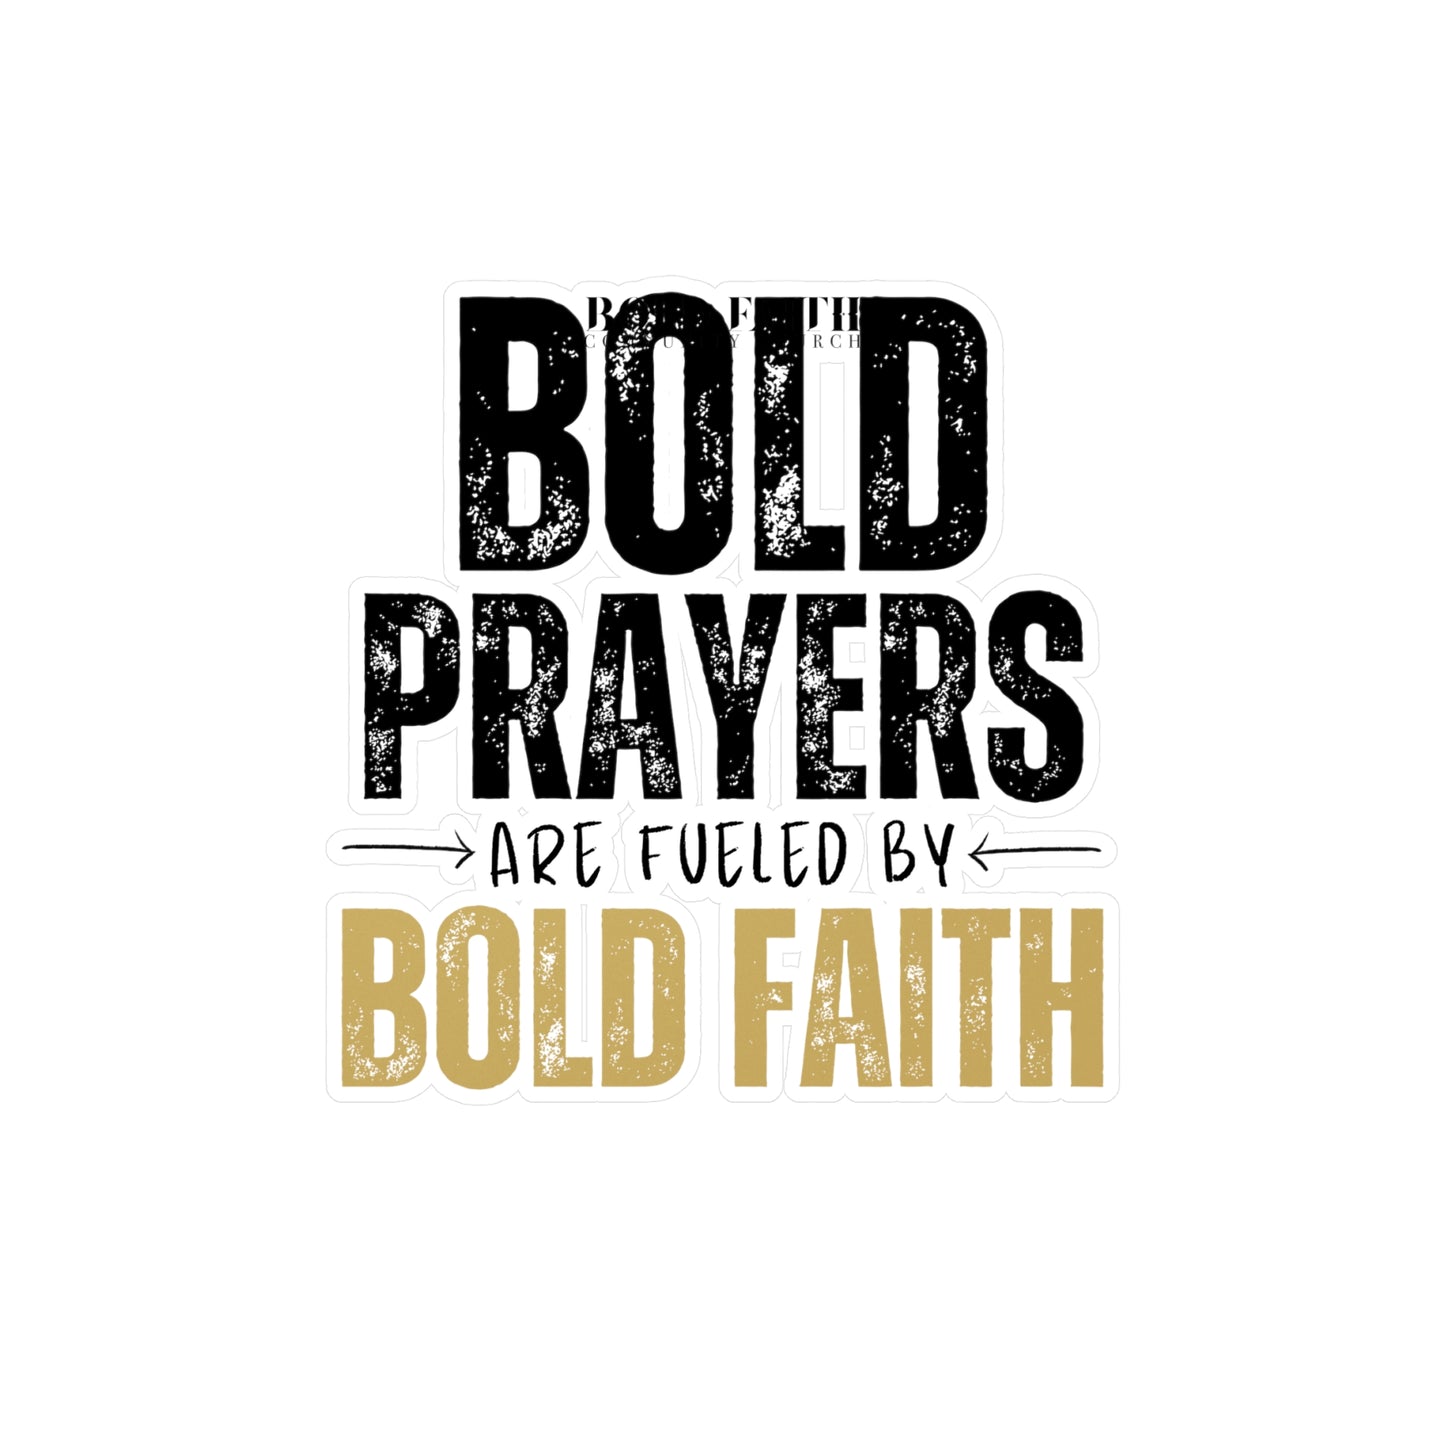 Bold Prayers Are Fueled by Bold Faith Kiss-Cut Vinyl Sticker or Decals